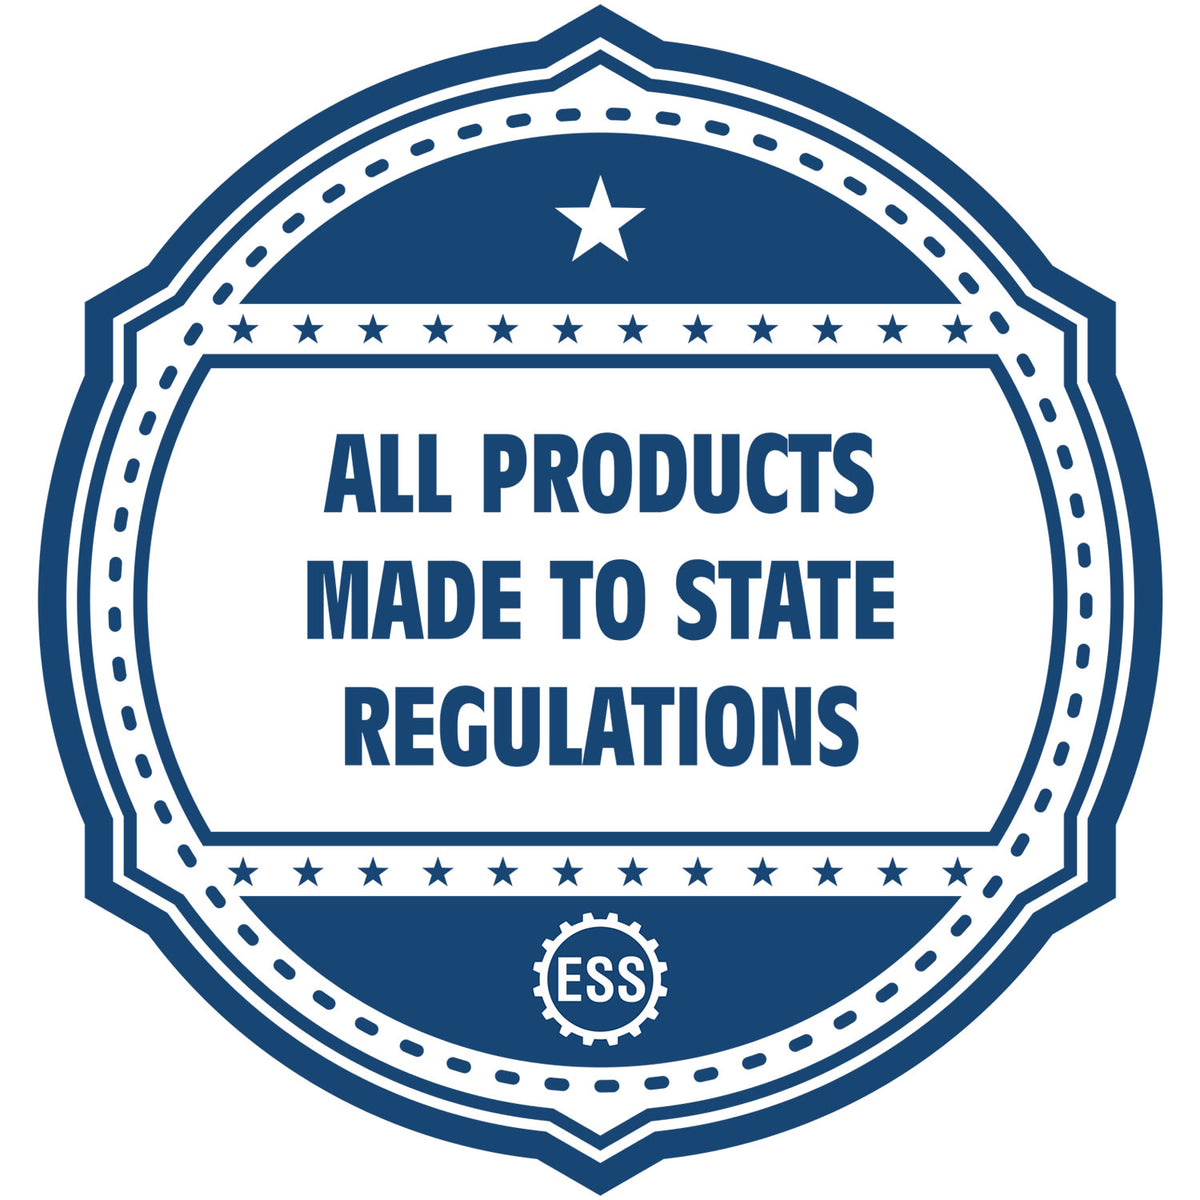 A blue icon or badge for the Hybrid Utah Landscape Architect Seal showing that this product is made in compliance with state regulations.